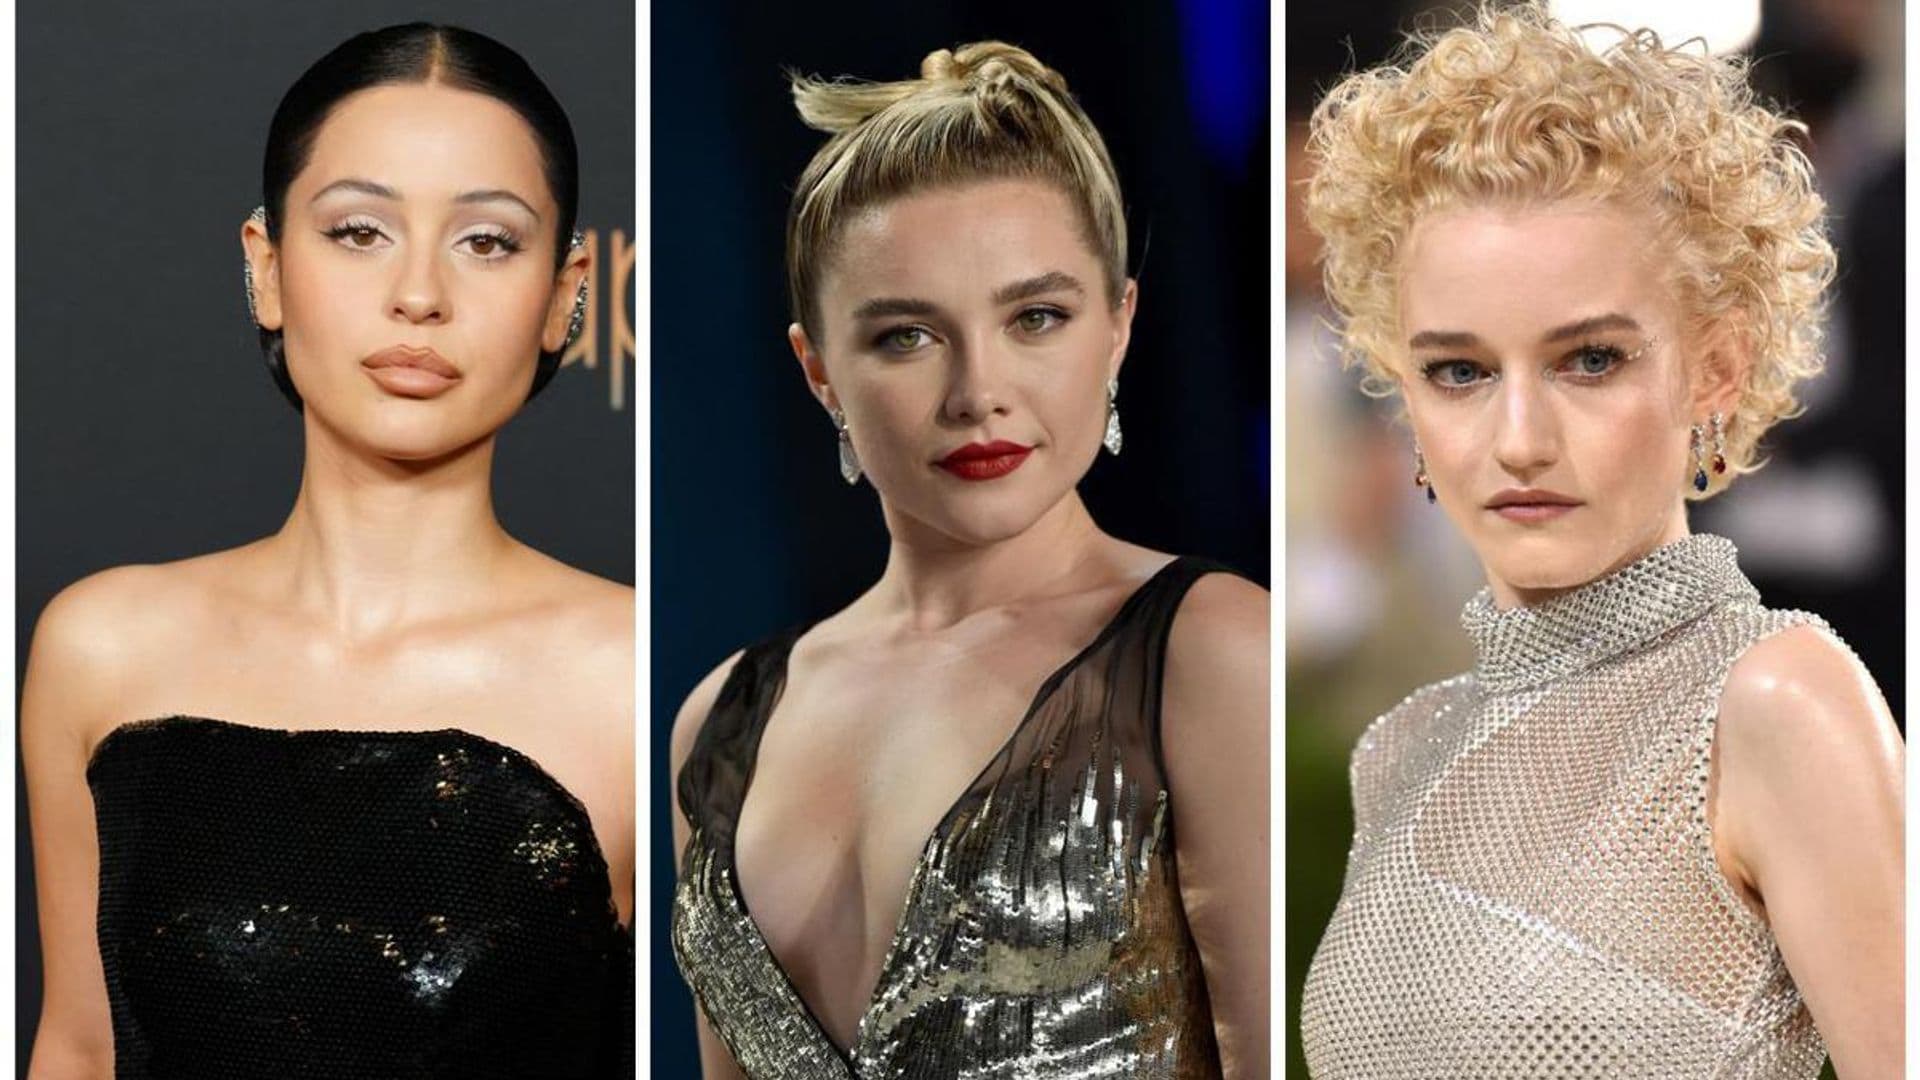 Madonna’s biopic: Florence Pugh, Alexa Demie and more stars competing for the role in intense audition process